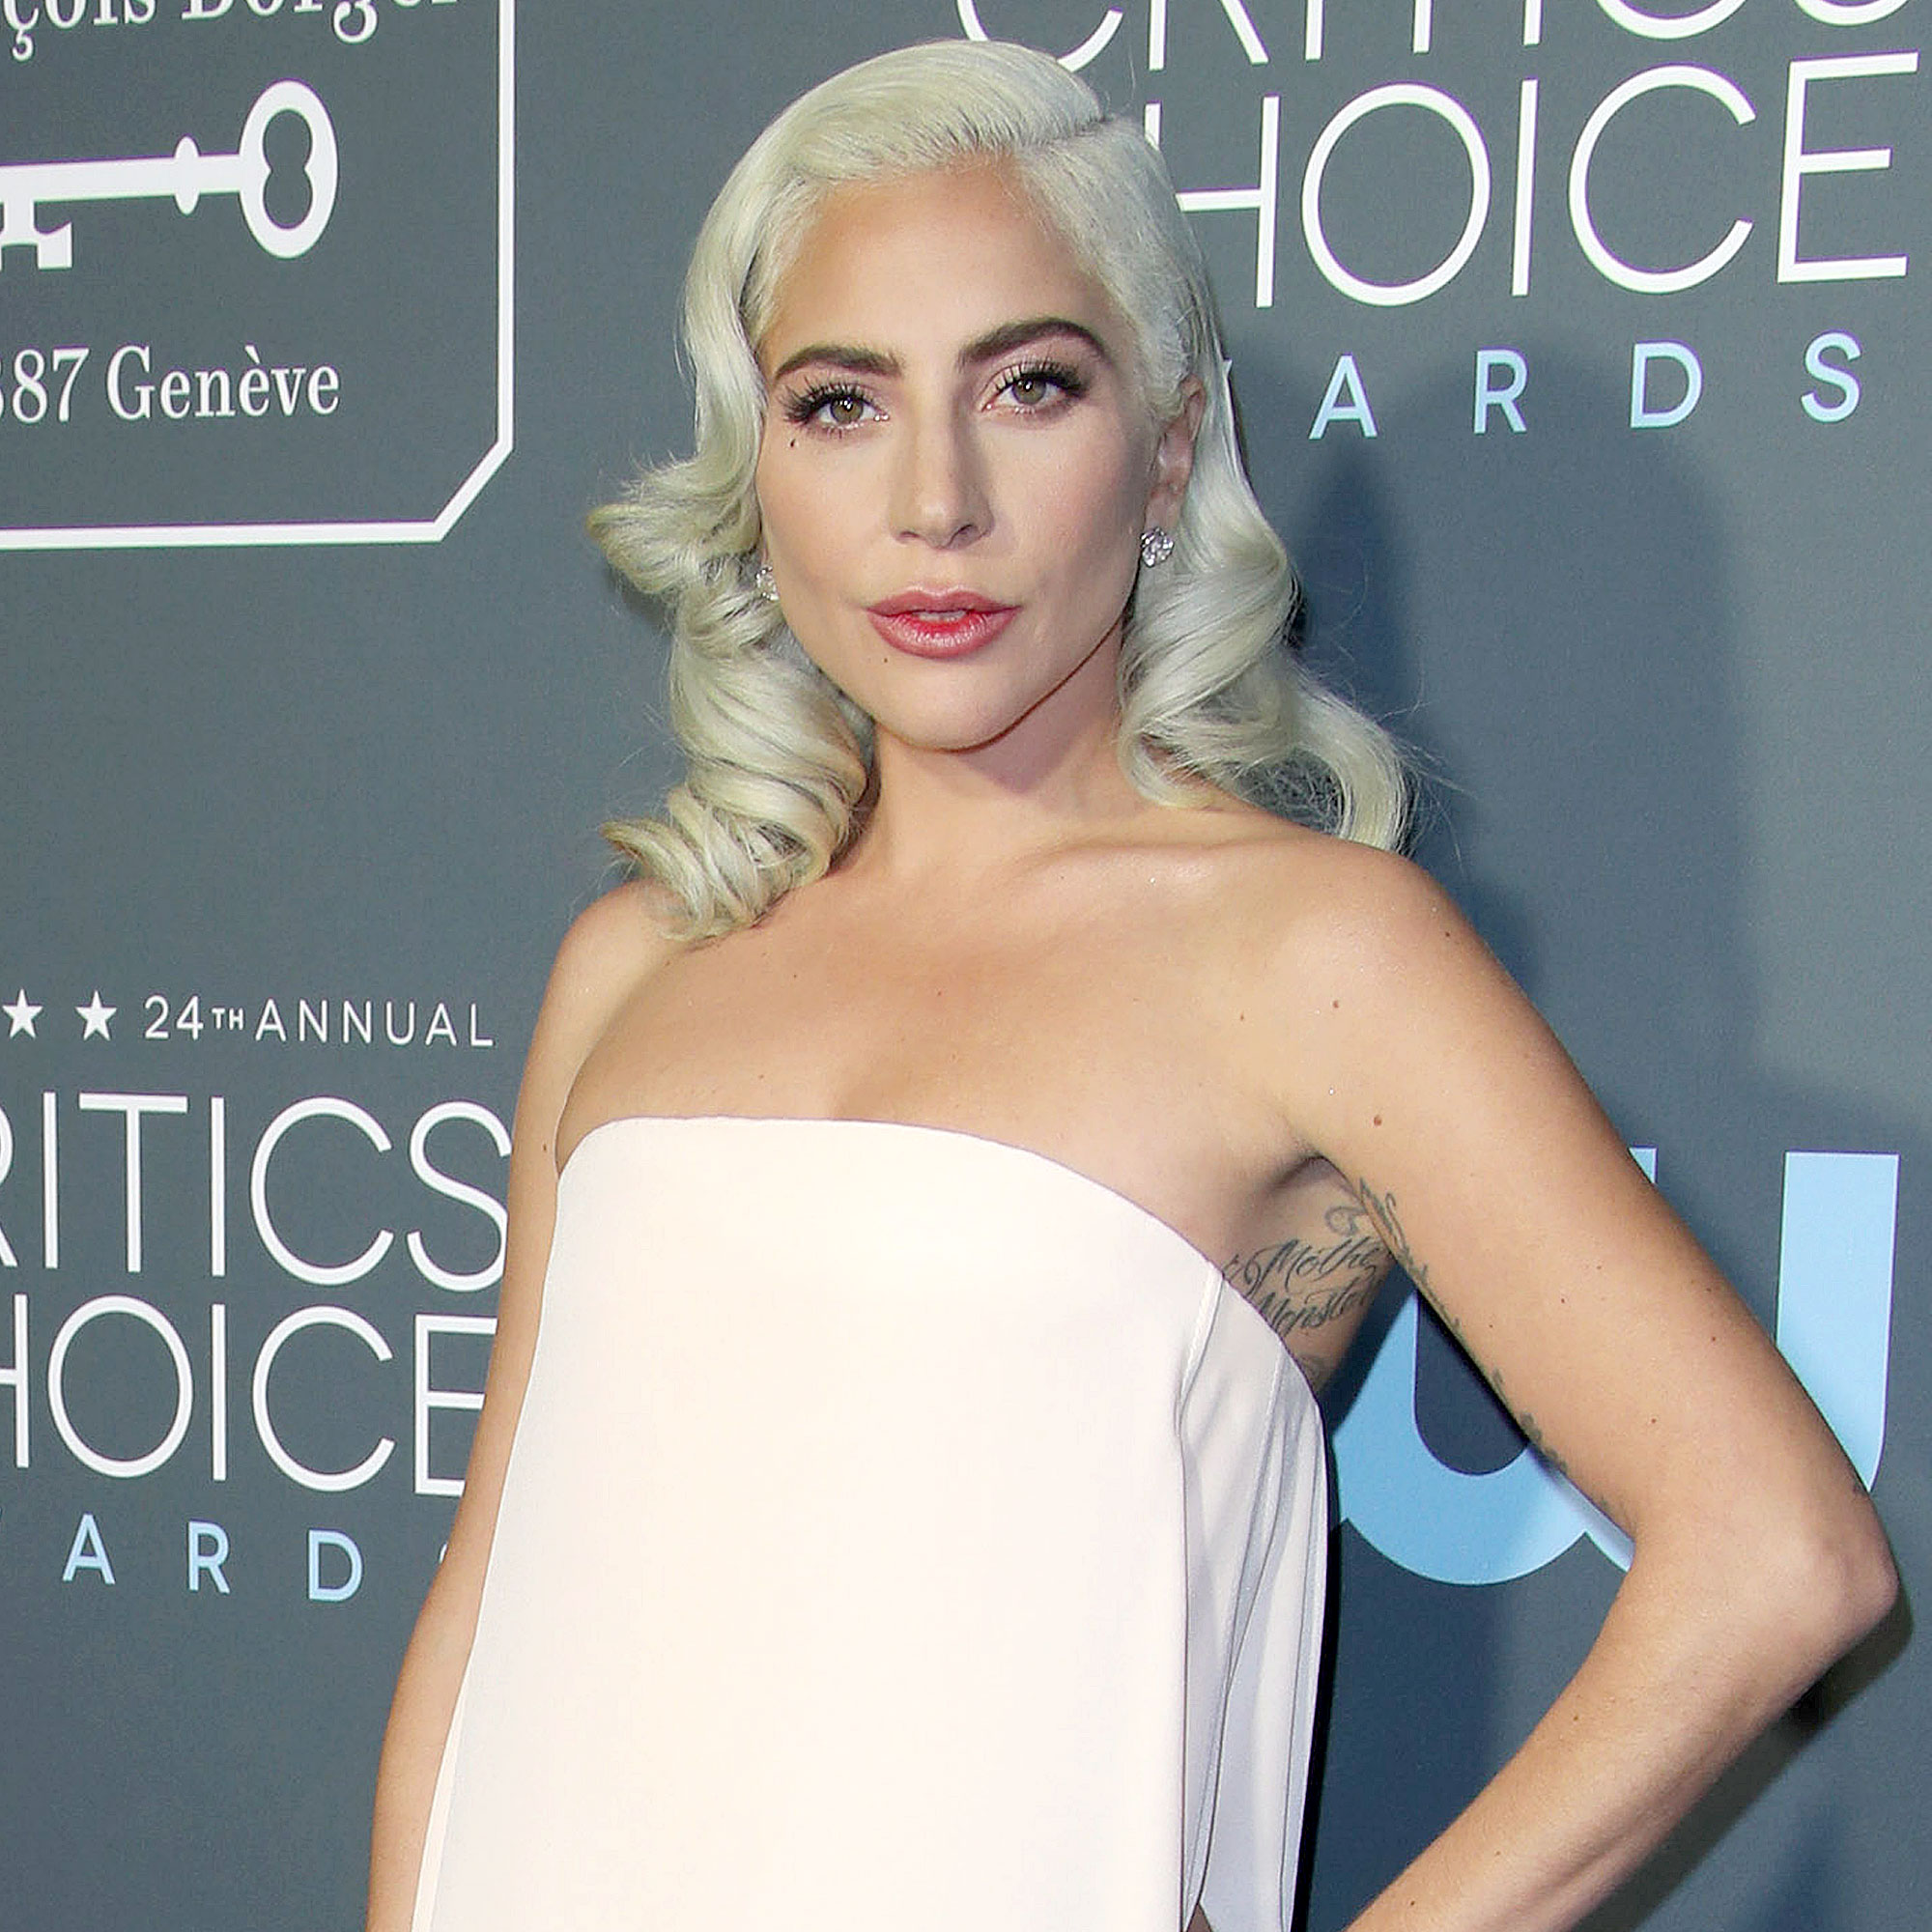 What Happened To Lady Gaga's Pregnancy: Fans Think Lady Gaga Was Pregnant At The Oscars During Her Liza Minnelli Tribute